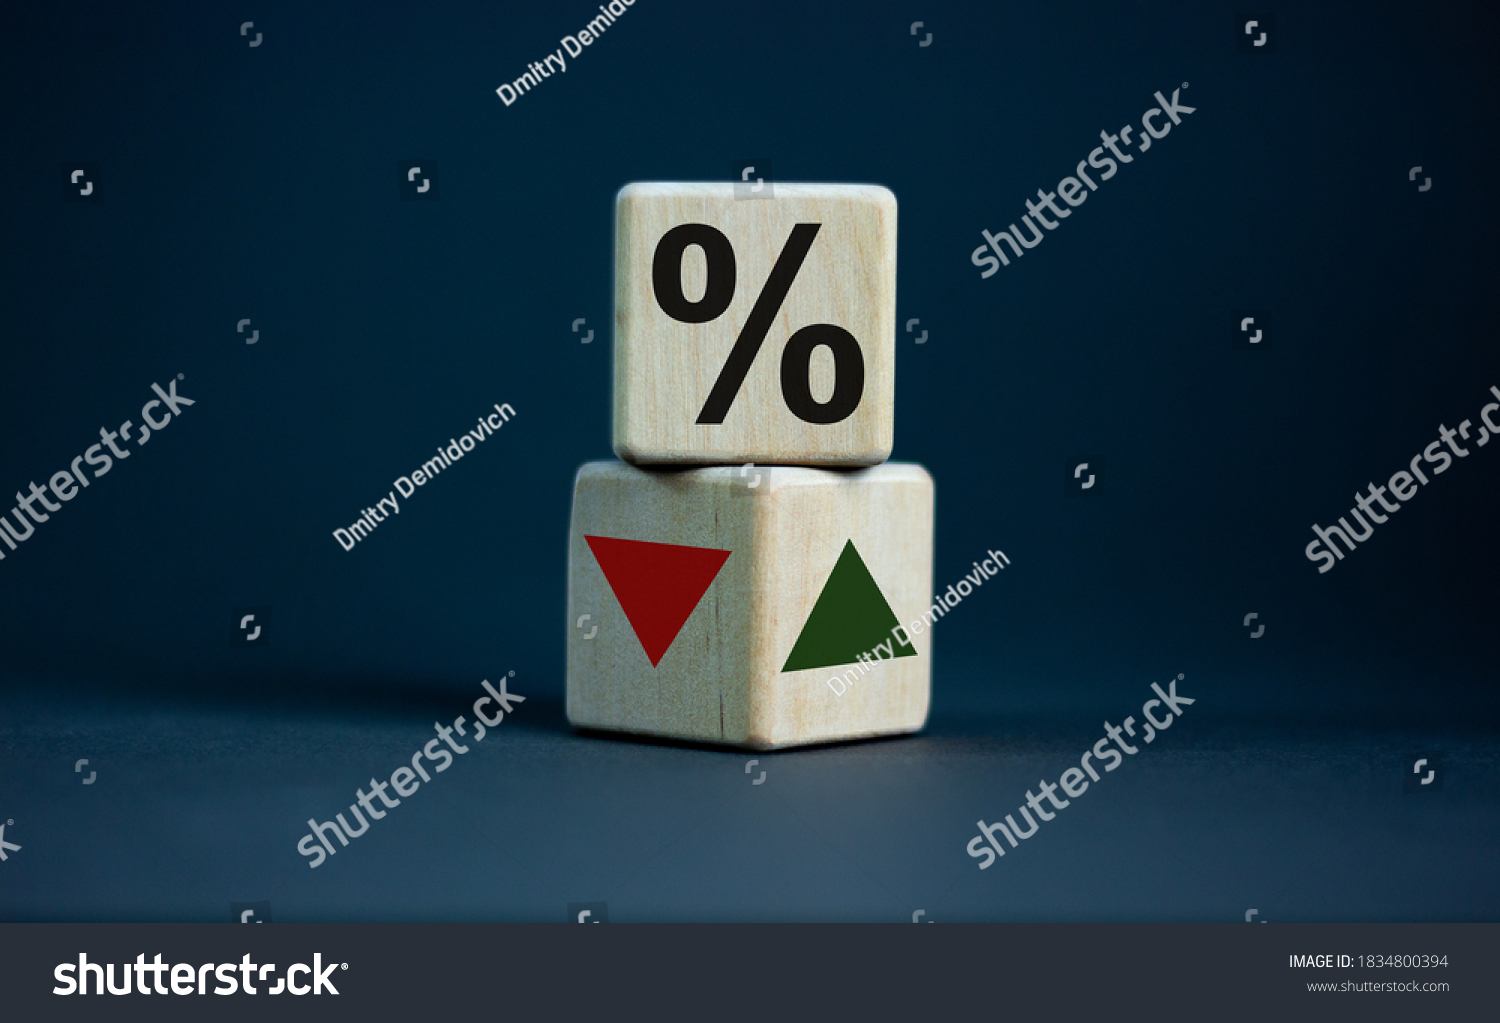 Wooden cubes changes the direction of an arrow symbolizing that the interest rates are going down or vice versa . Business concept. Copy space, beautiful grey background. #1834800394